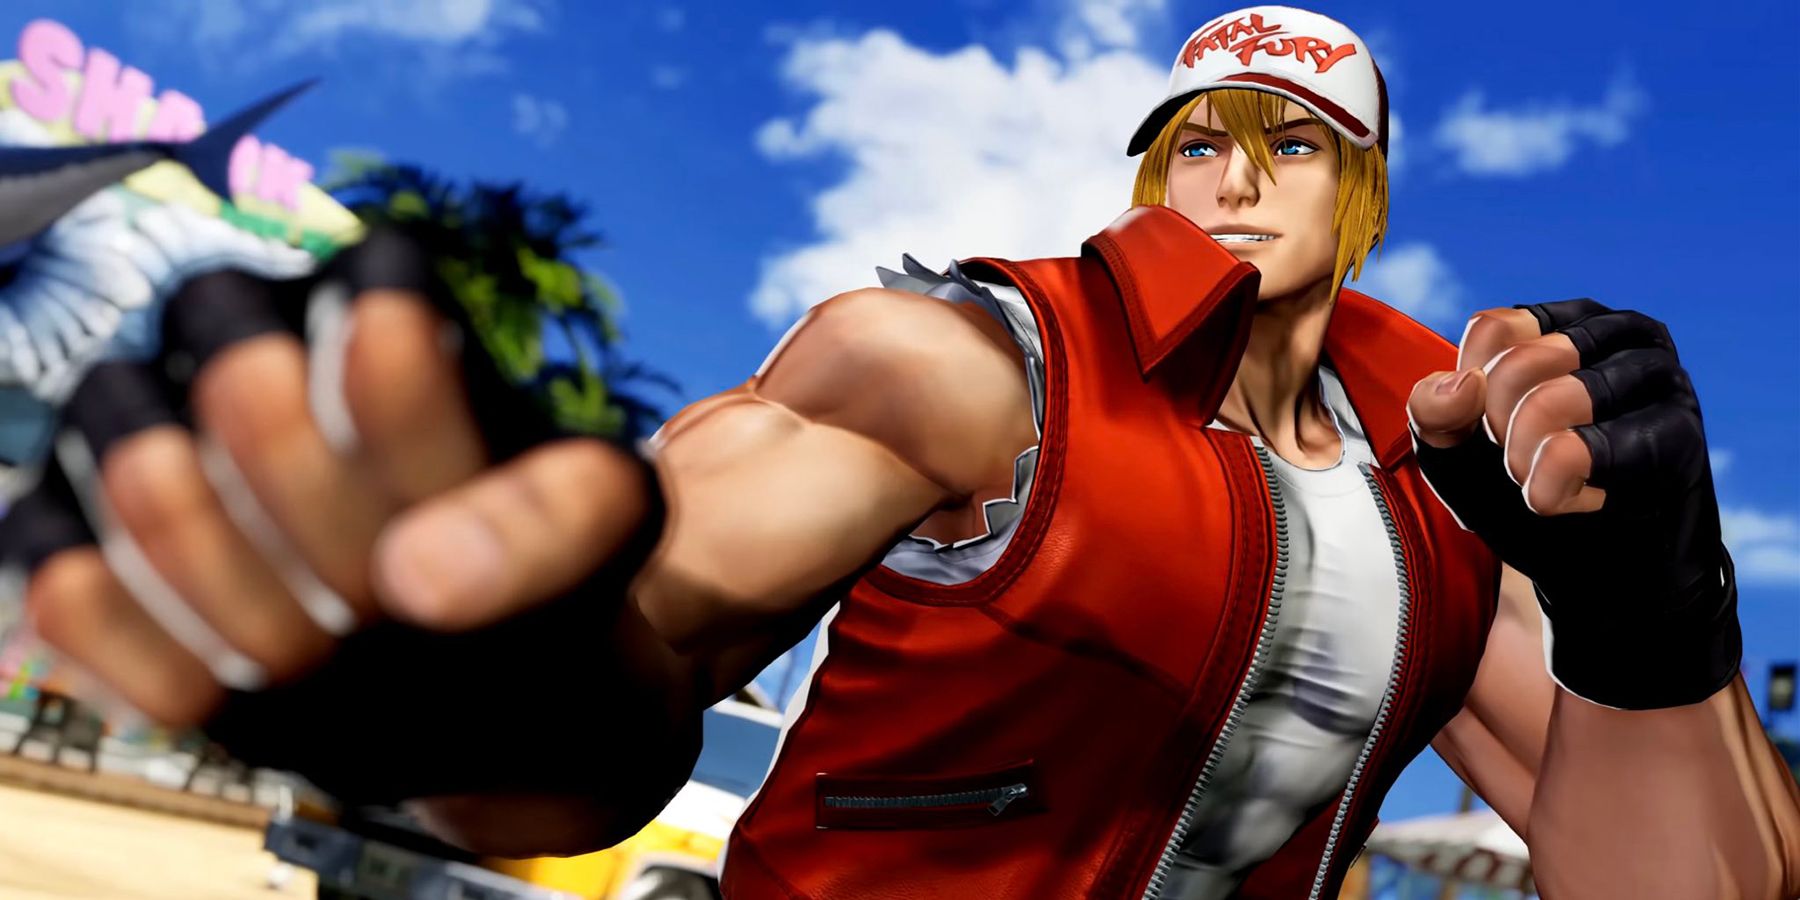 king-of-fighters-15-roster-terry-bogard